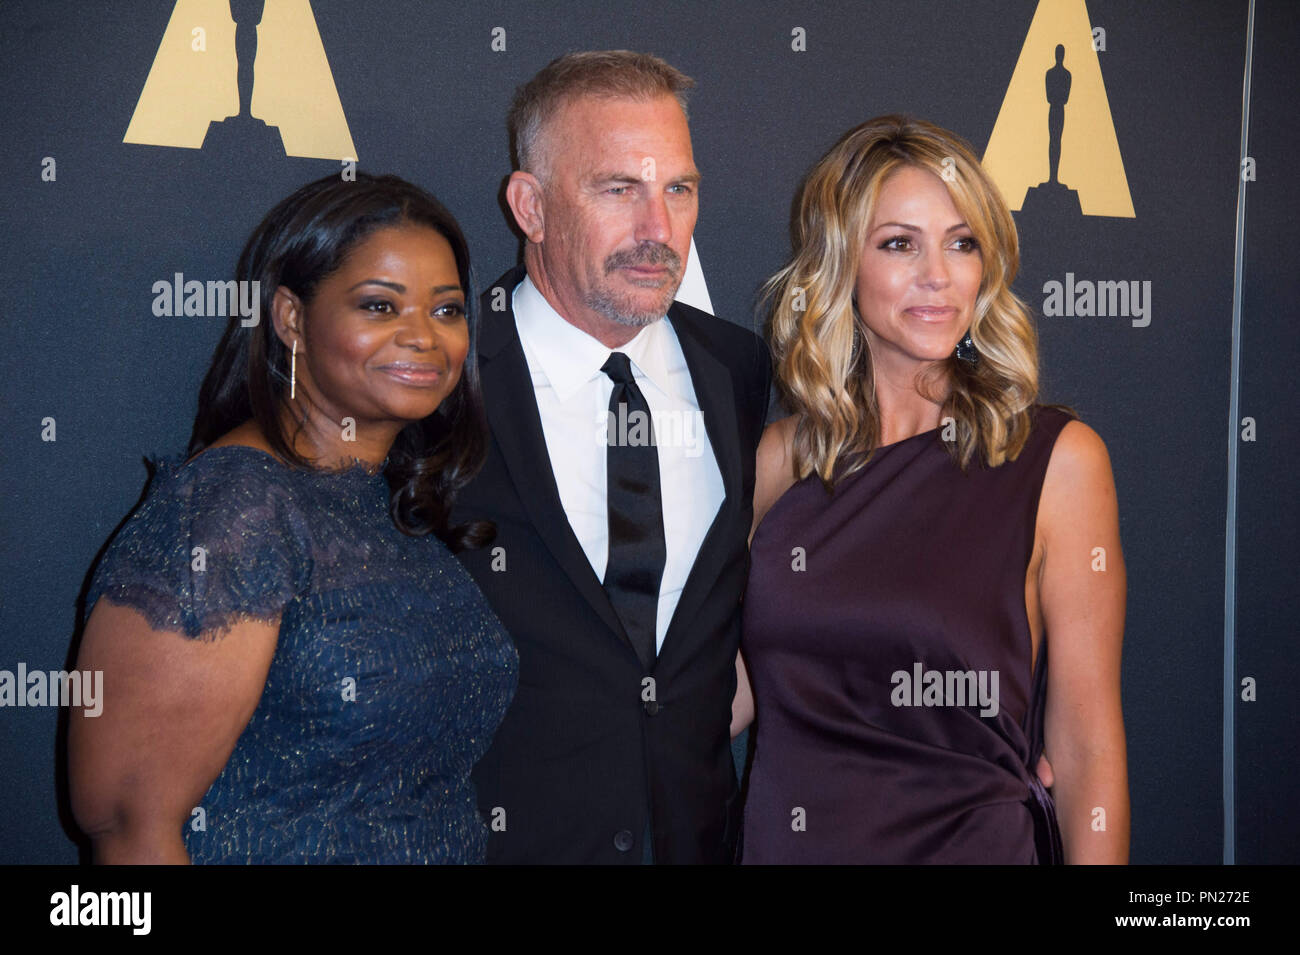 Octavia Spencer (left), Kevin Costner (center) and Christine Baumgartner attend the 6th Annual Governors Awards in The Ray Dolby Ballroom at Hollywood & Highland Center® in Hollywood, CA, on Saturday, November 8, 2014.  File Reference # 32487 036THA  For Editorial Use Only -  All Rights Reserved Stock Photo